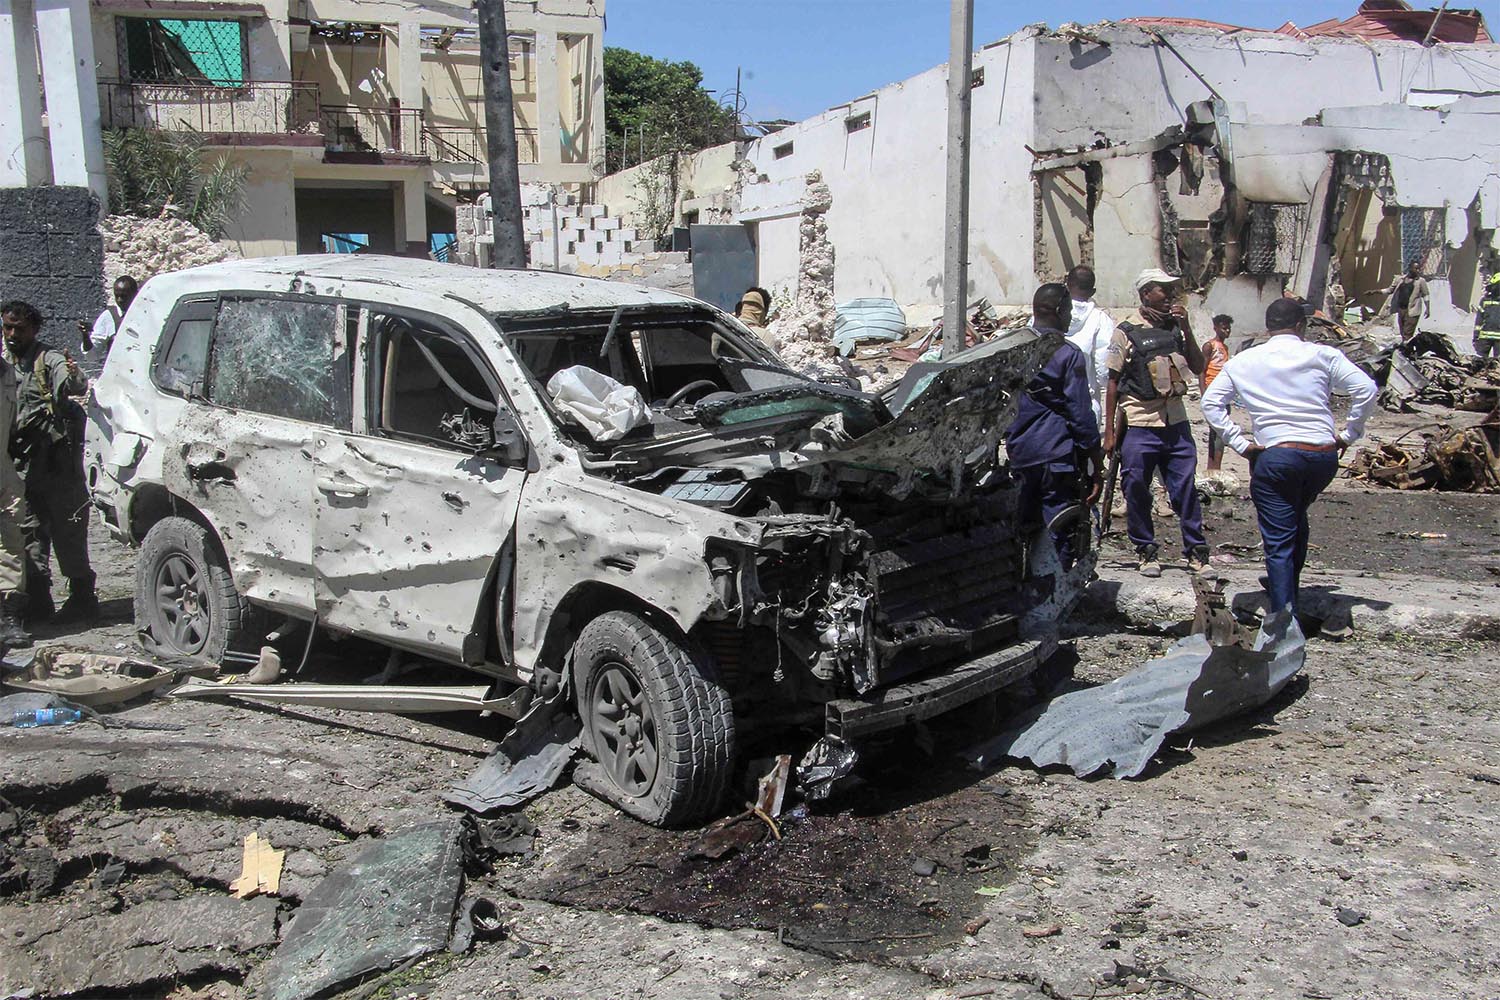 The car bomb attack occurred amid the latest period of political and security uncertainty in Somalia